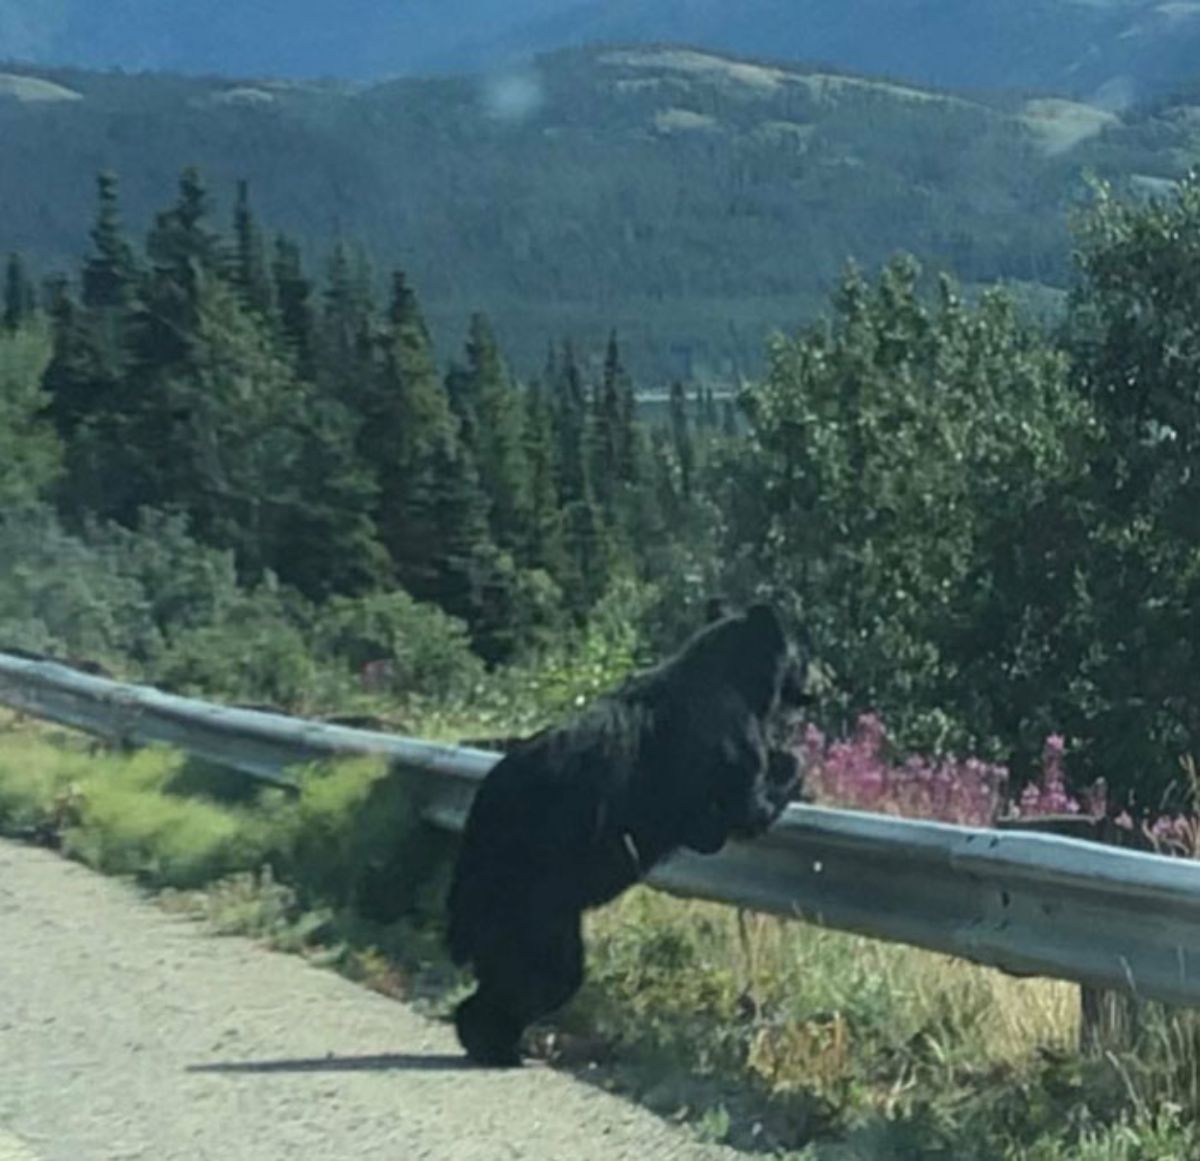 black bear standing on hind legs and leaning on a metal railing and looking at the trees below